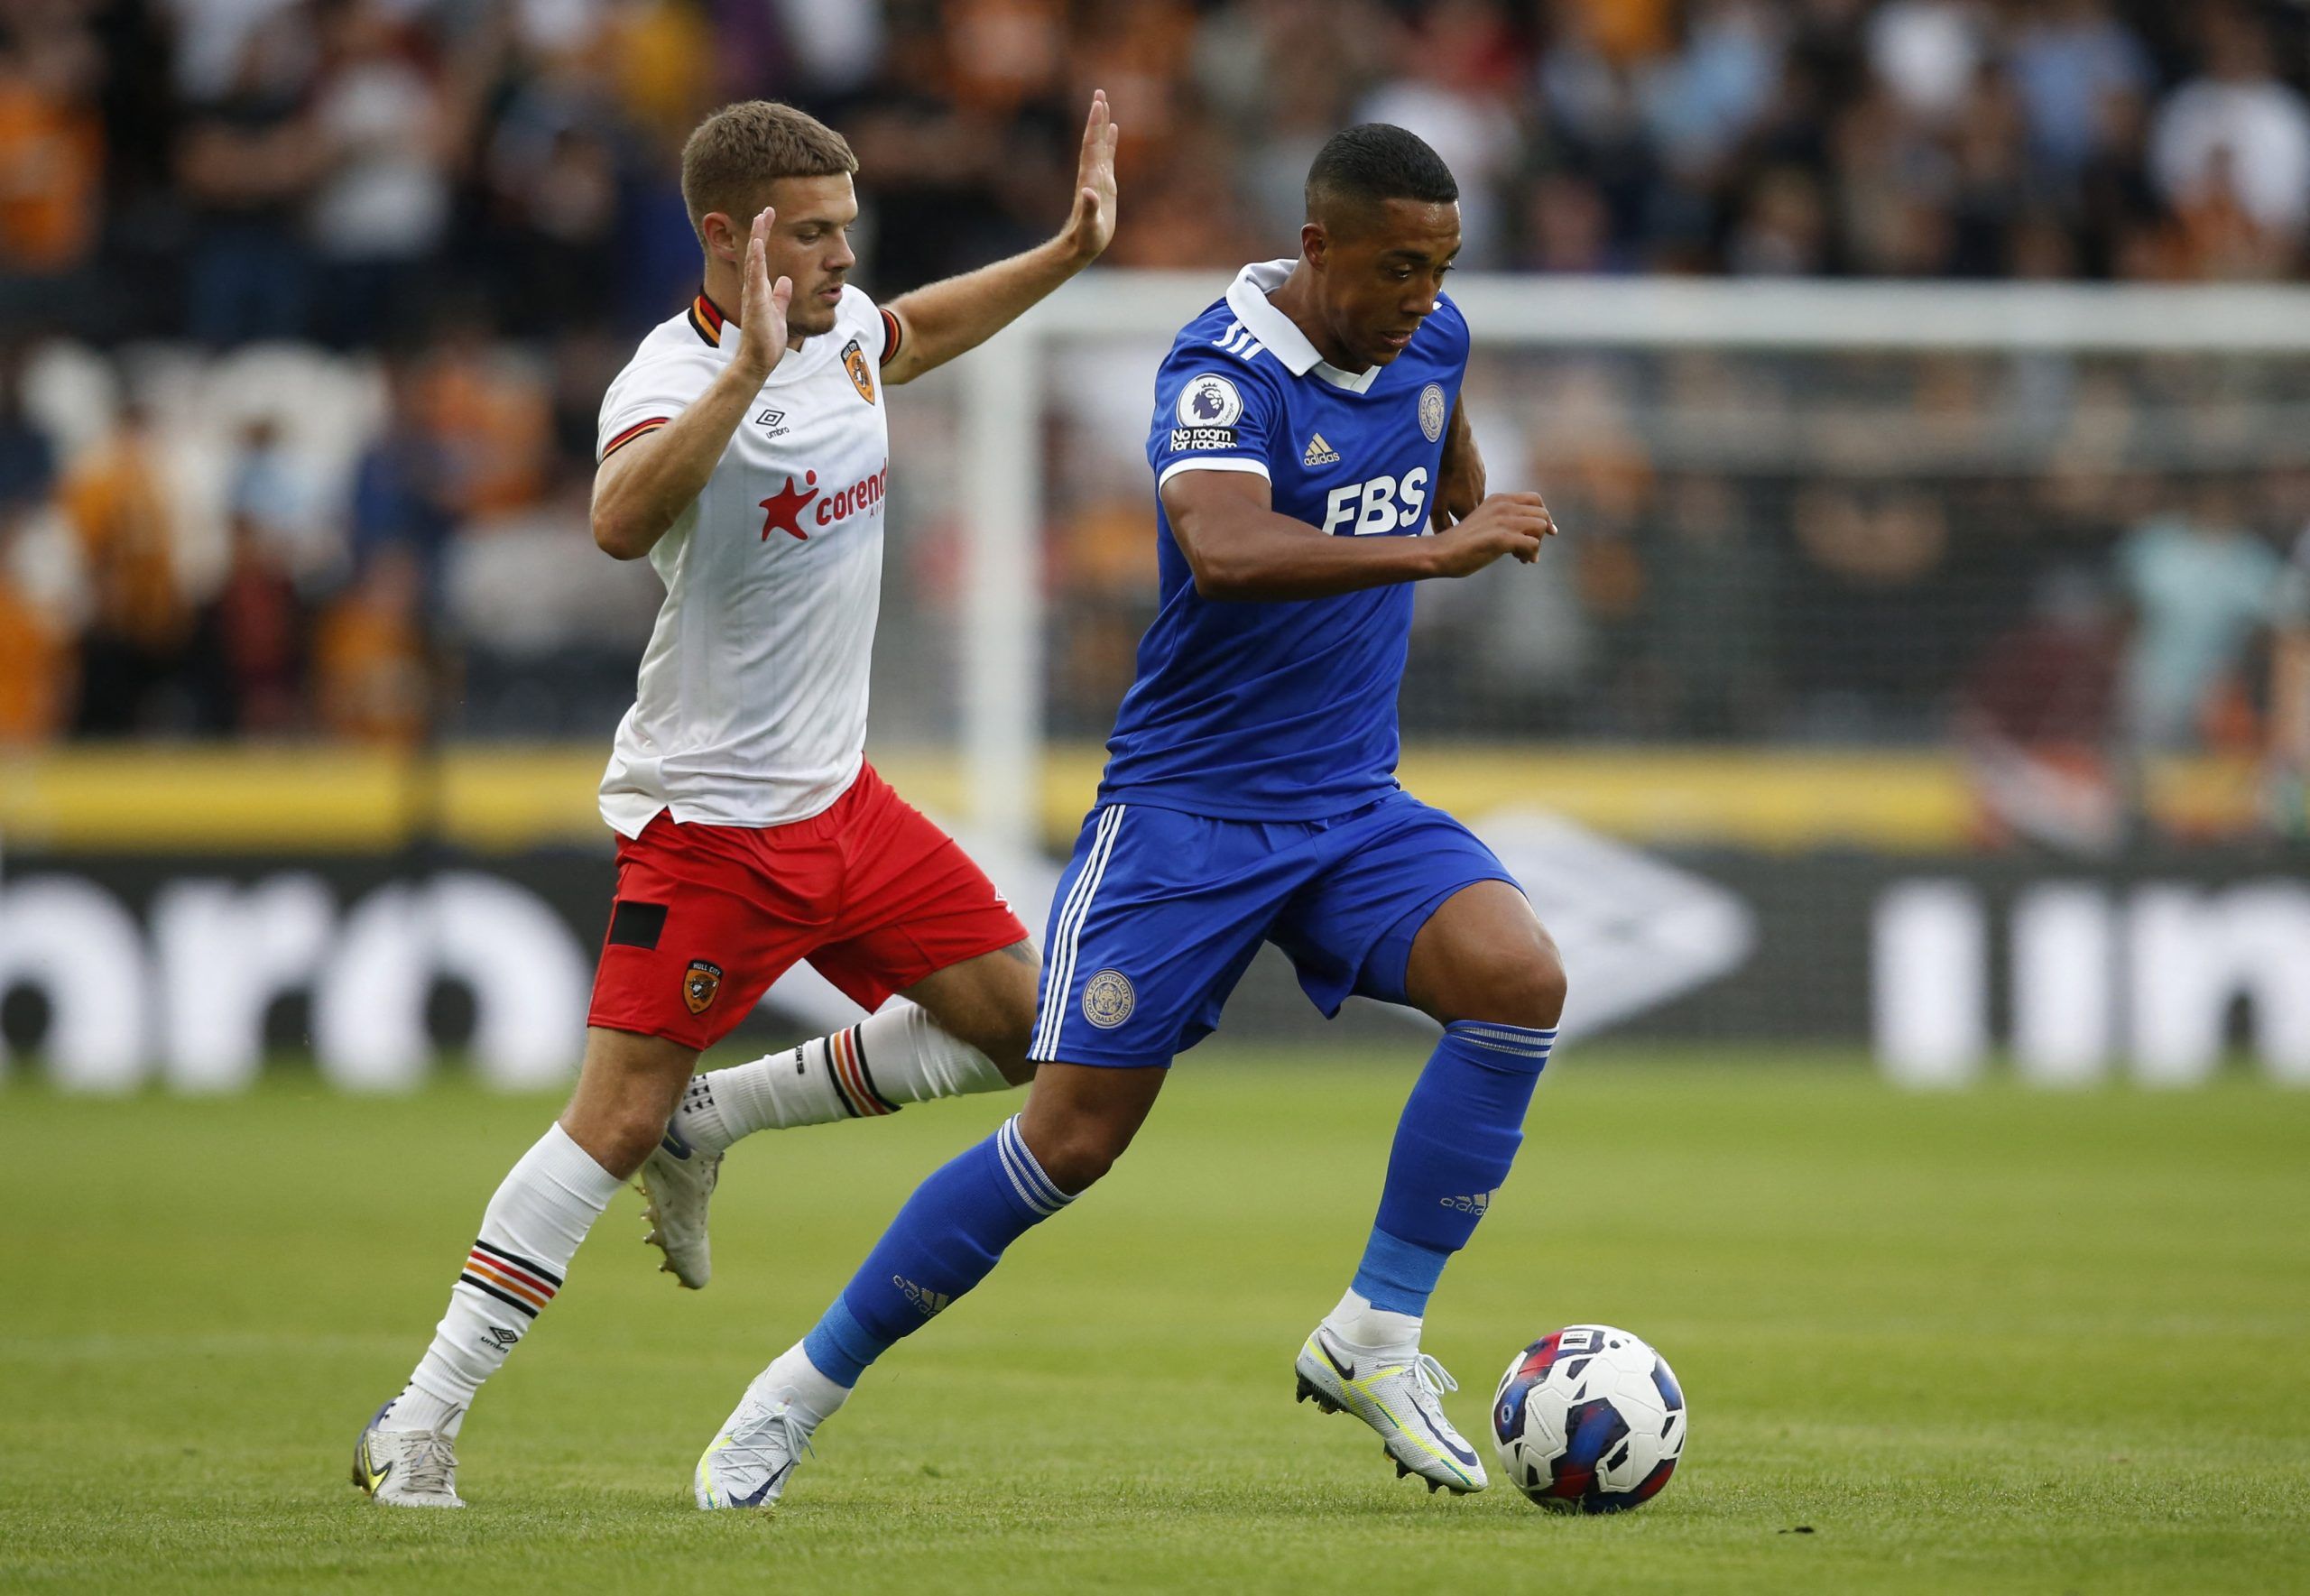 Soccer Football - Pre Season Friendly - Hull City v Leicester City - MKM Stadium, Hull, Britain - July 20, 2022 Hull City's Regan Slater in action with Leicester City's Youri Tielemans Action Images via Reuters/Ed Sykes